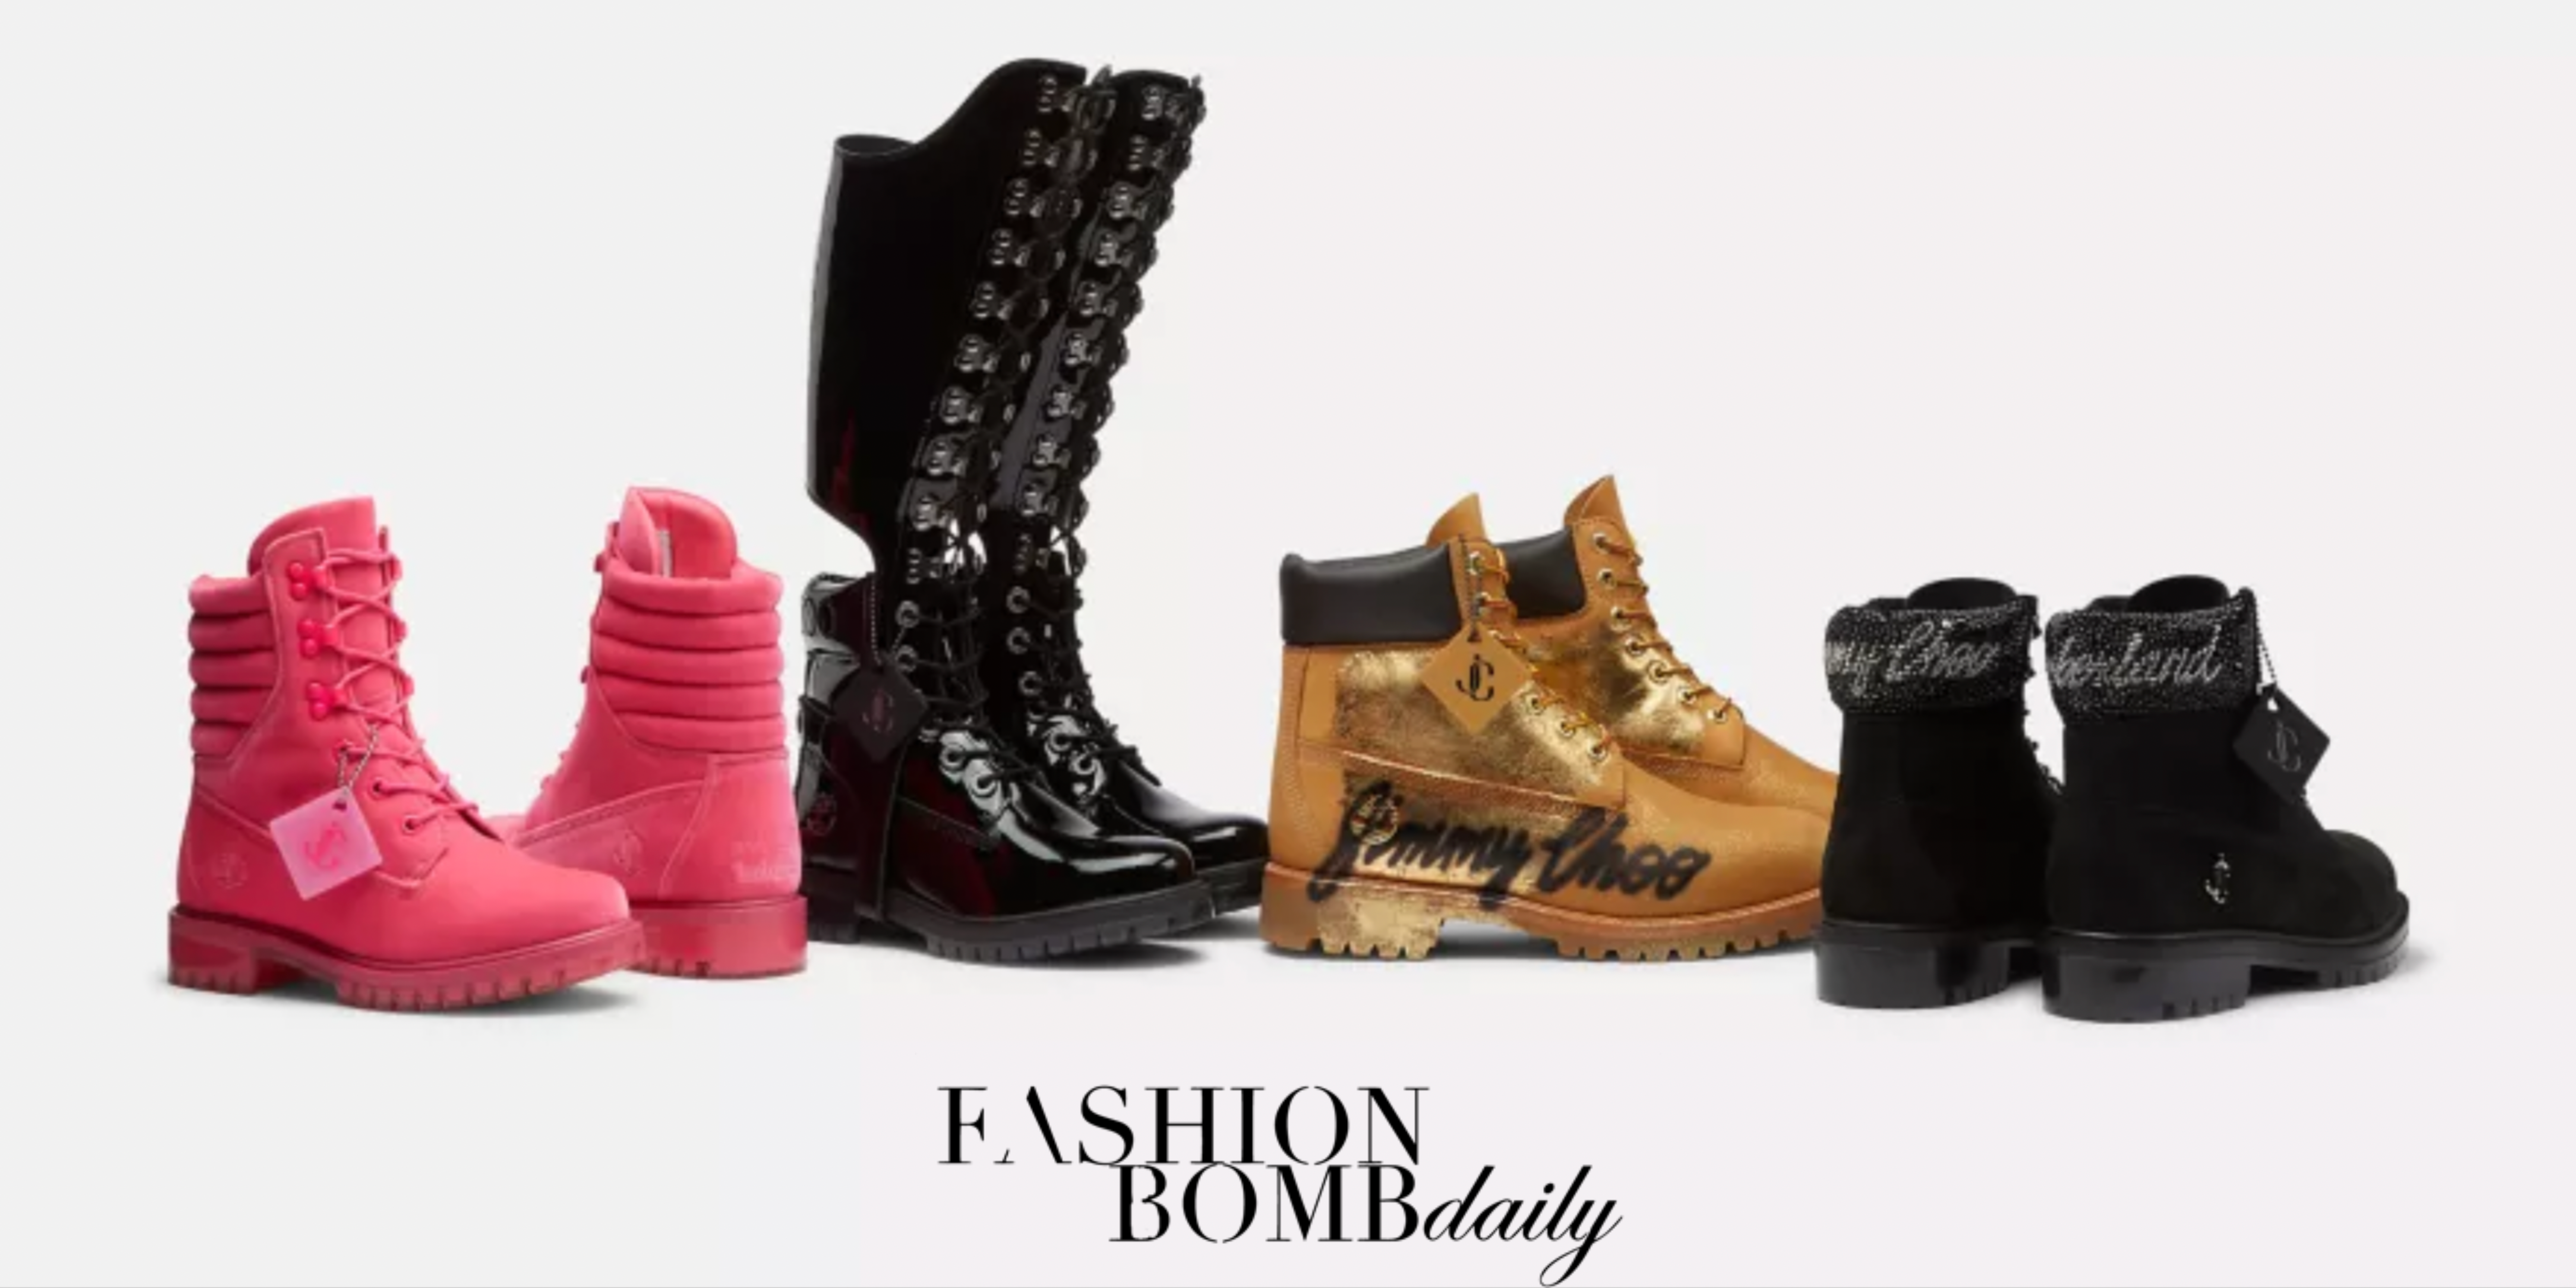 Fashion Bomb Daily - One of the hottest boot designs of the season